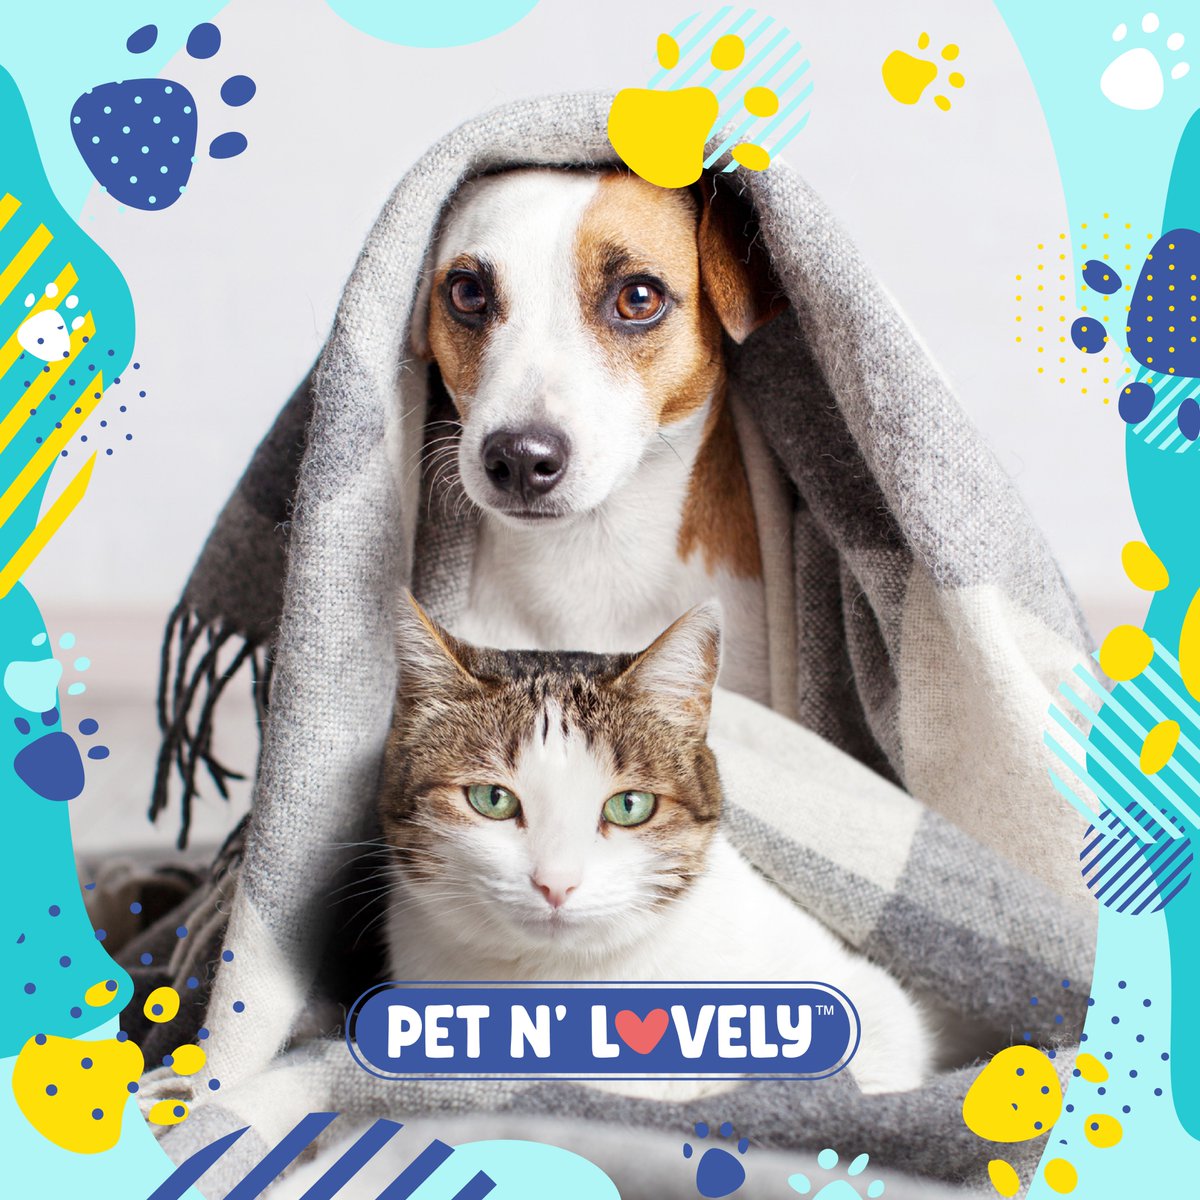 Keep your pets clean and looking pawsome with Pet N’ Lovely 🐾
.
.
#petnlovely #dogshampoo #catshampoo #petandlovely #dogshampoo #dogbath #dogstylist #doggroomersrock #doggrooming #doggroominglife #doggroomersofinstagram #petparent #dogmomlife #productsfordogs #dogmom